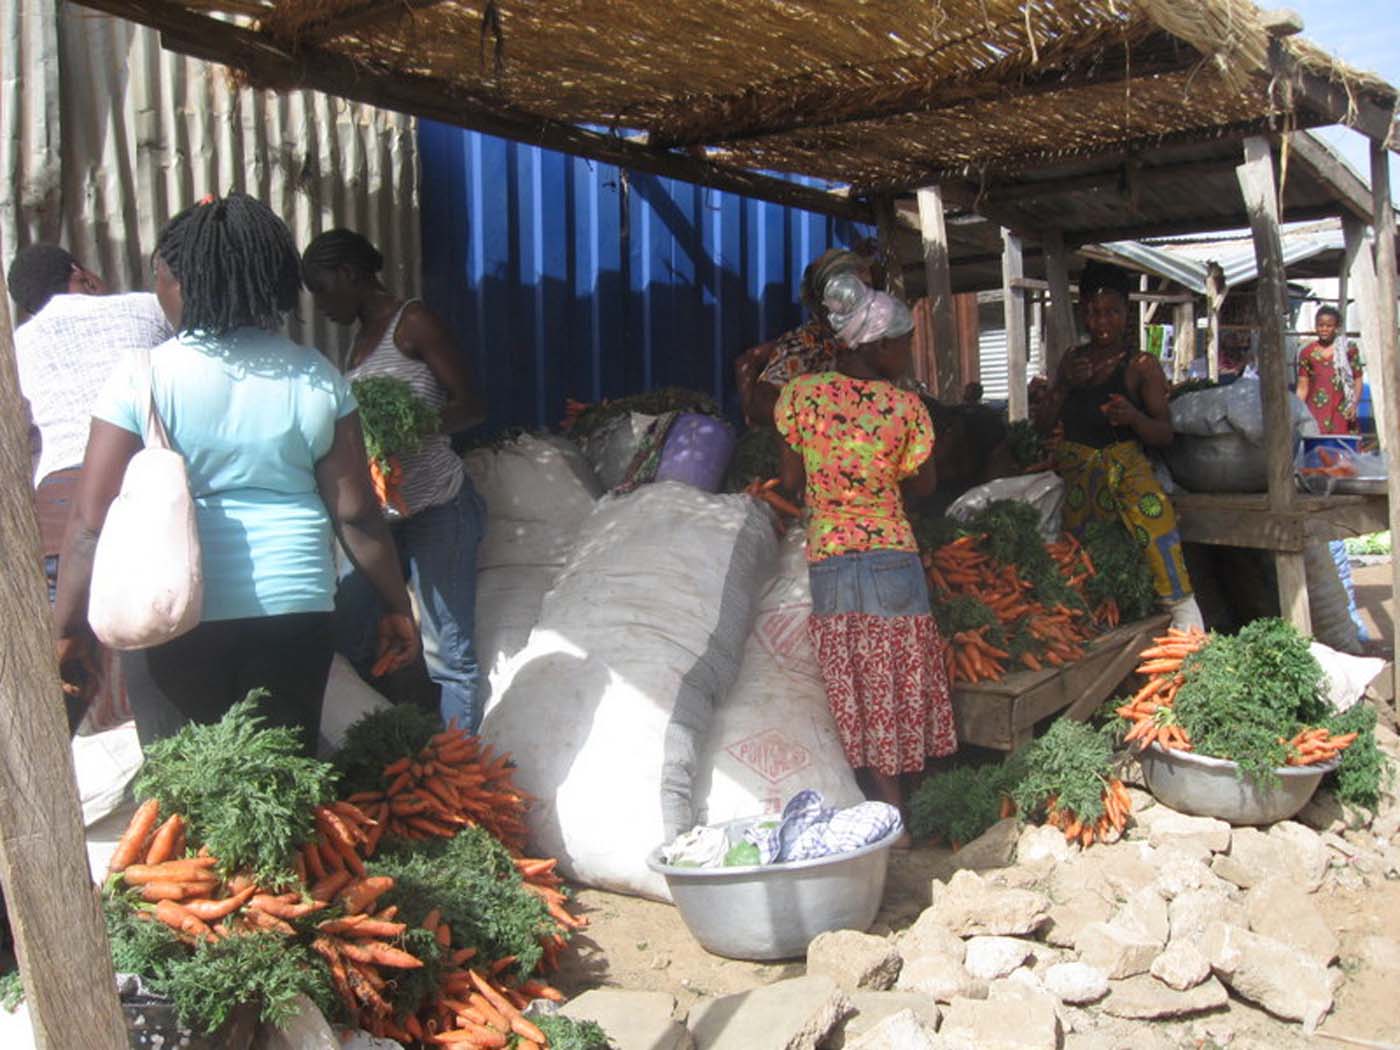 Women selling carrots and other wares